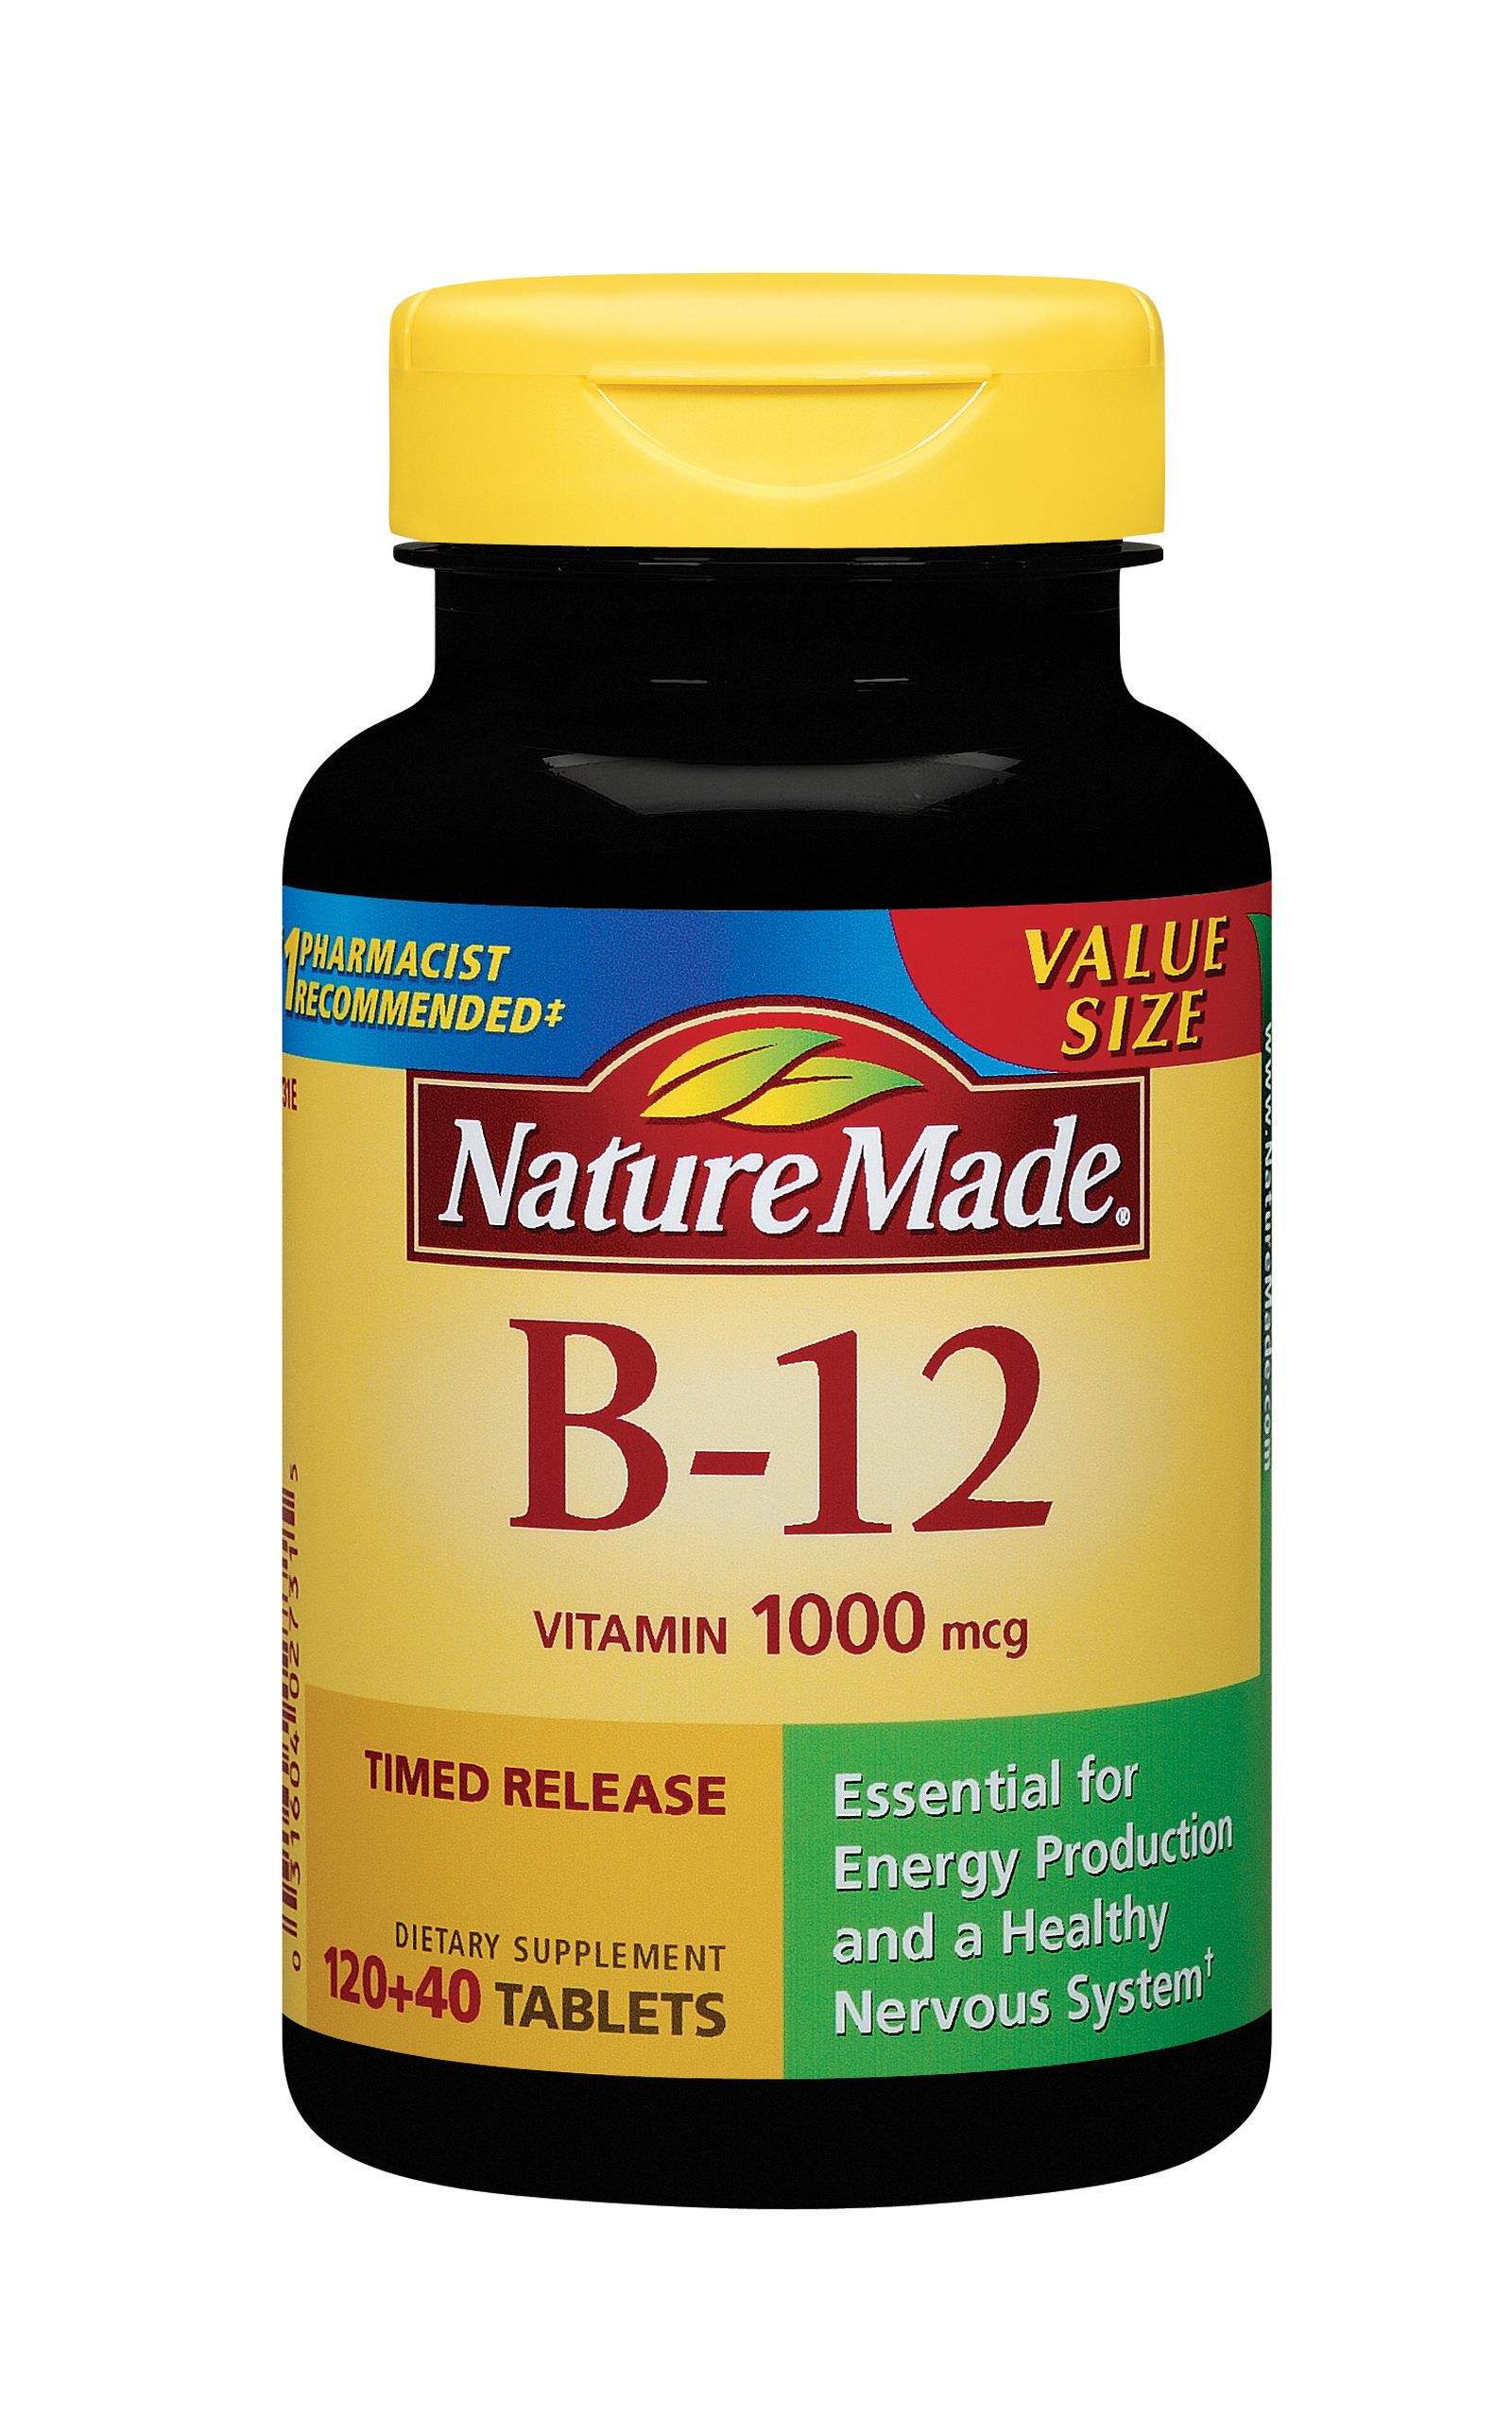 Vitamin B-12 1000 mcg Timed Release, Value Size, 160 Tablets